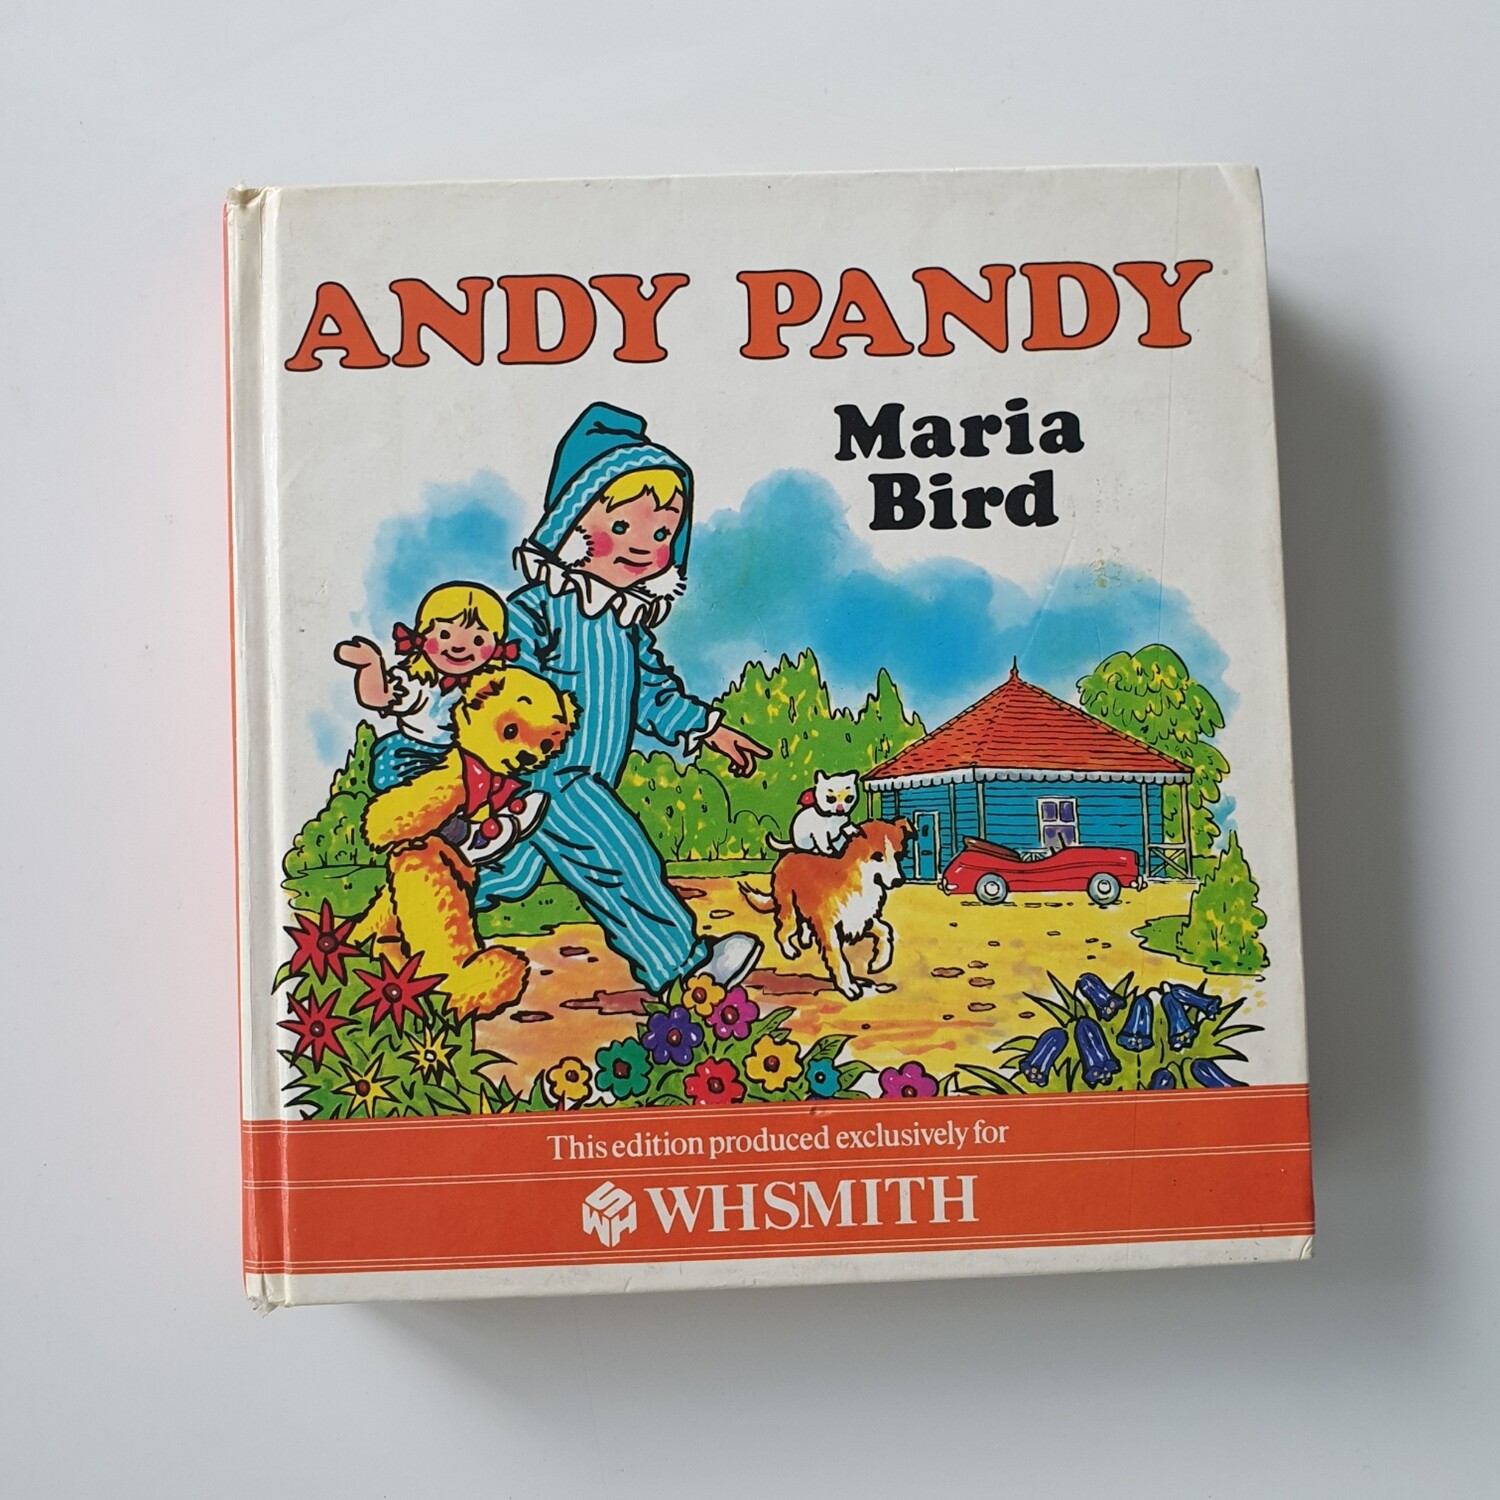 Andy Pandy, 1982